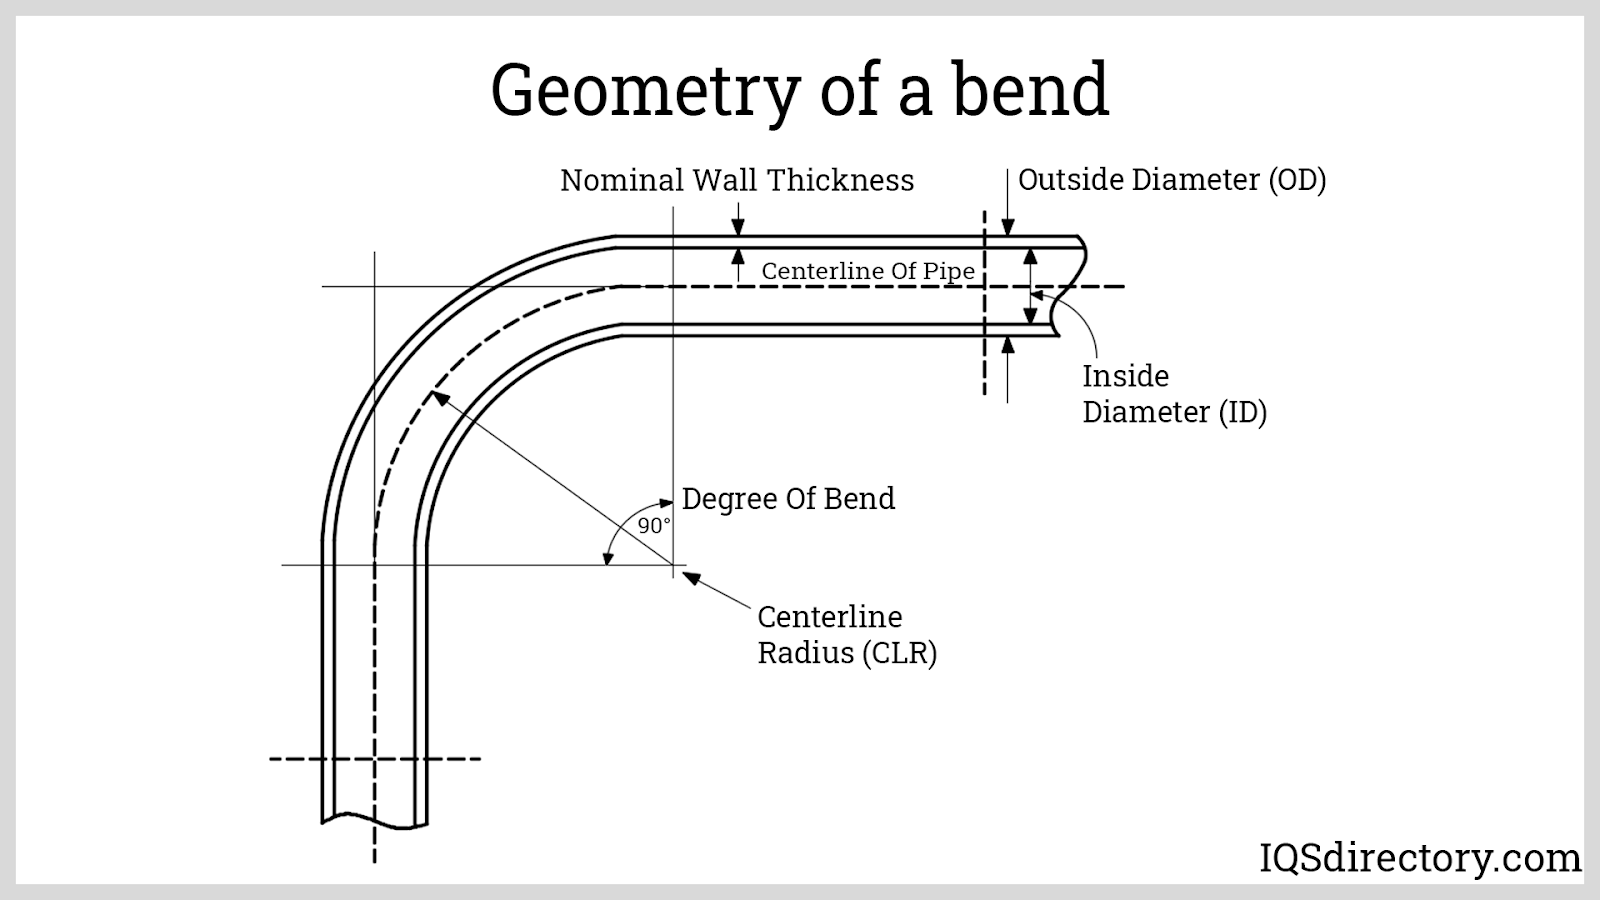 Geometry of a Bend